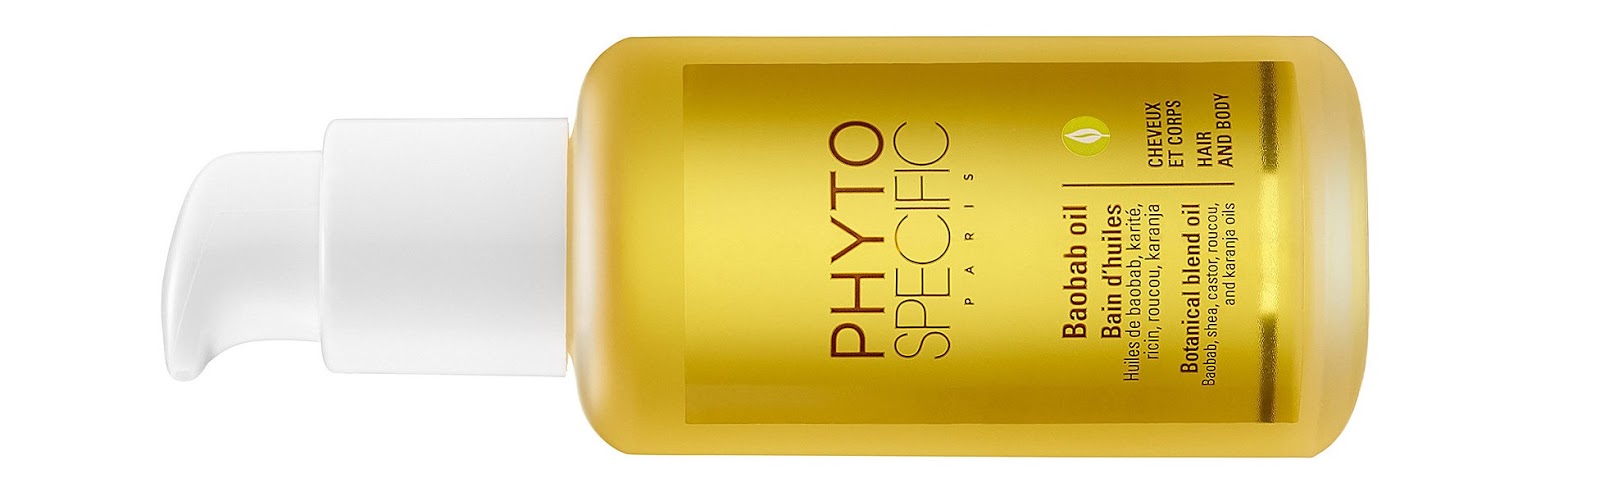 PhytoSpecific Baobab Oil review